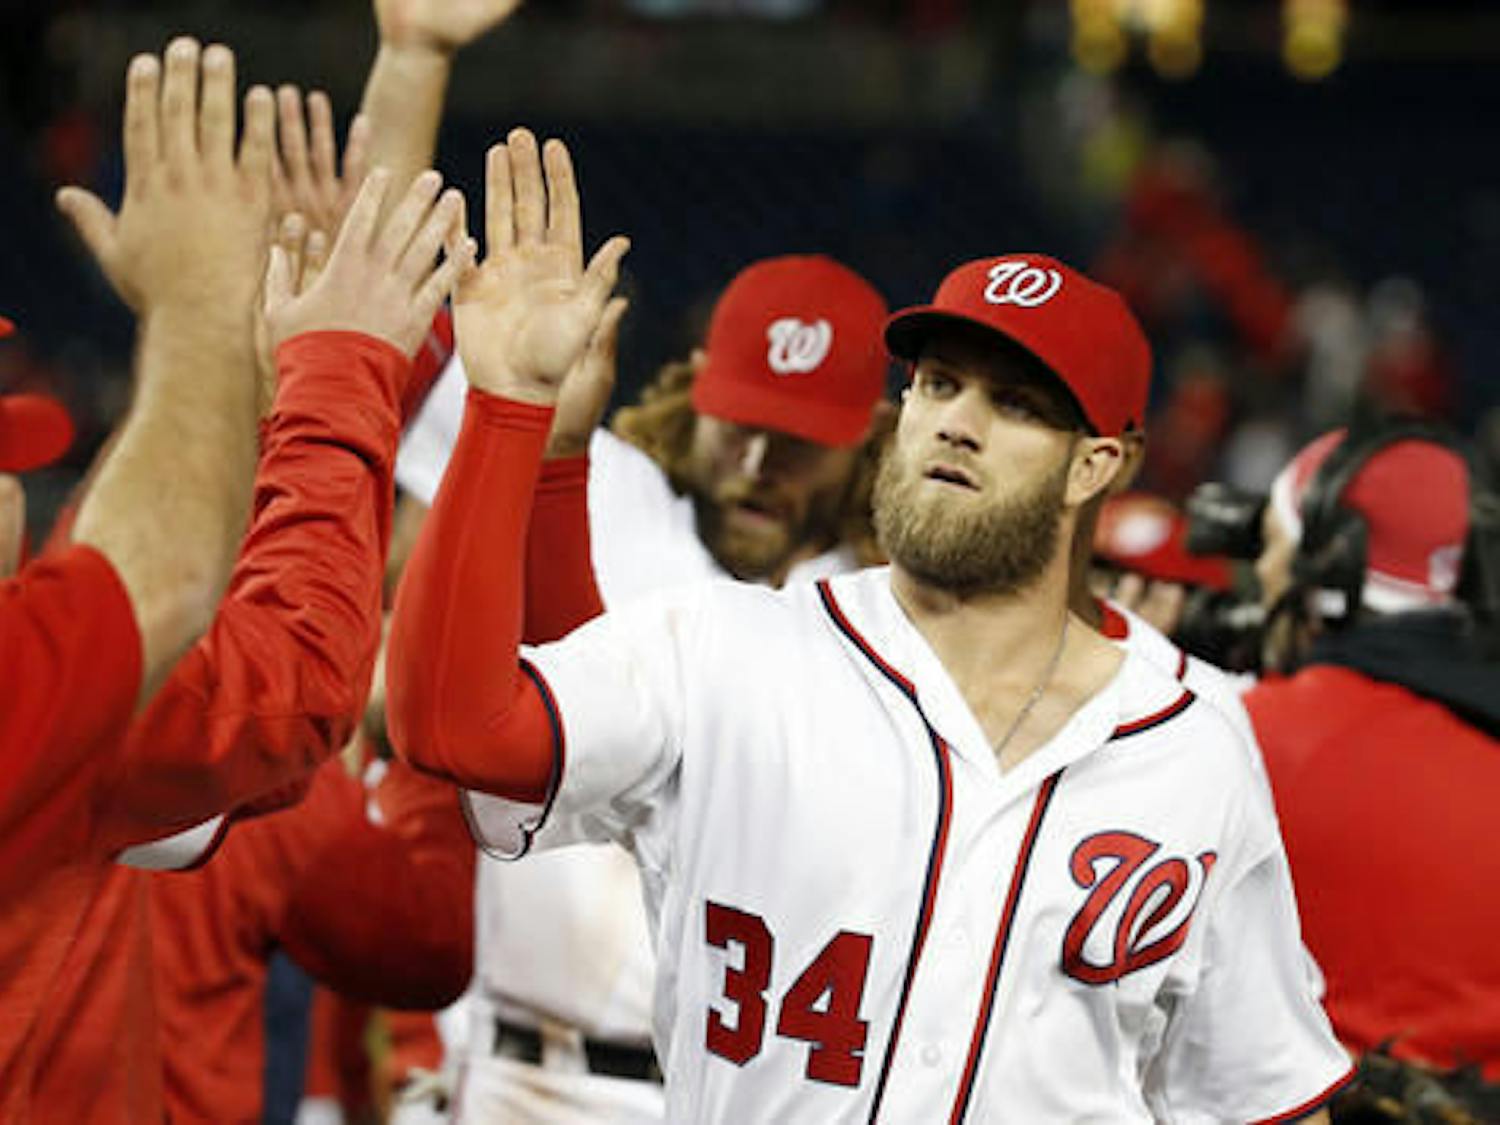 Washington Nationals' Bryce Harper (34) celebrates with teammates after a baseball game against the Atlanta Braves at Nationals Park, Tuesday, April 12, 2016, in Washington. Harper hit a two-run double in the eighth innings. The Nationals won 2-1. (AP Photo/Alex Brandon)